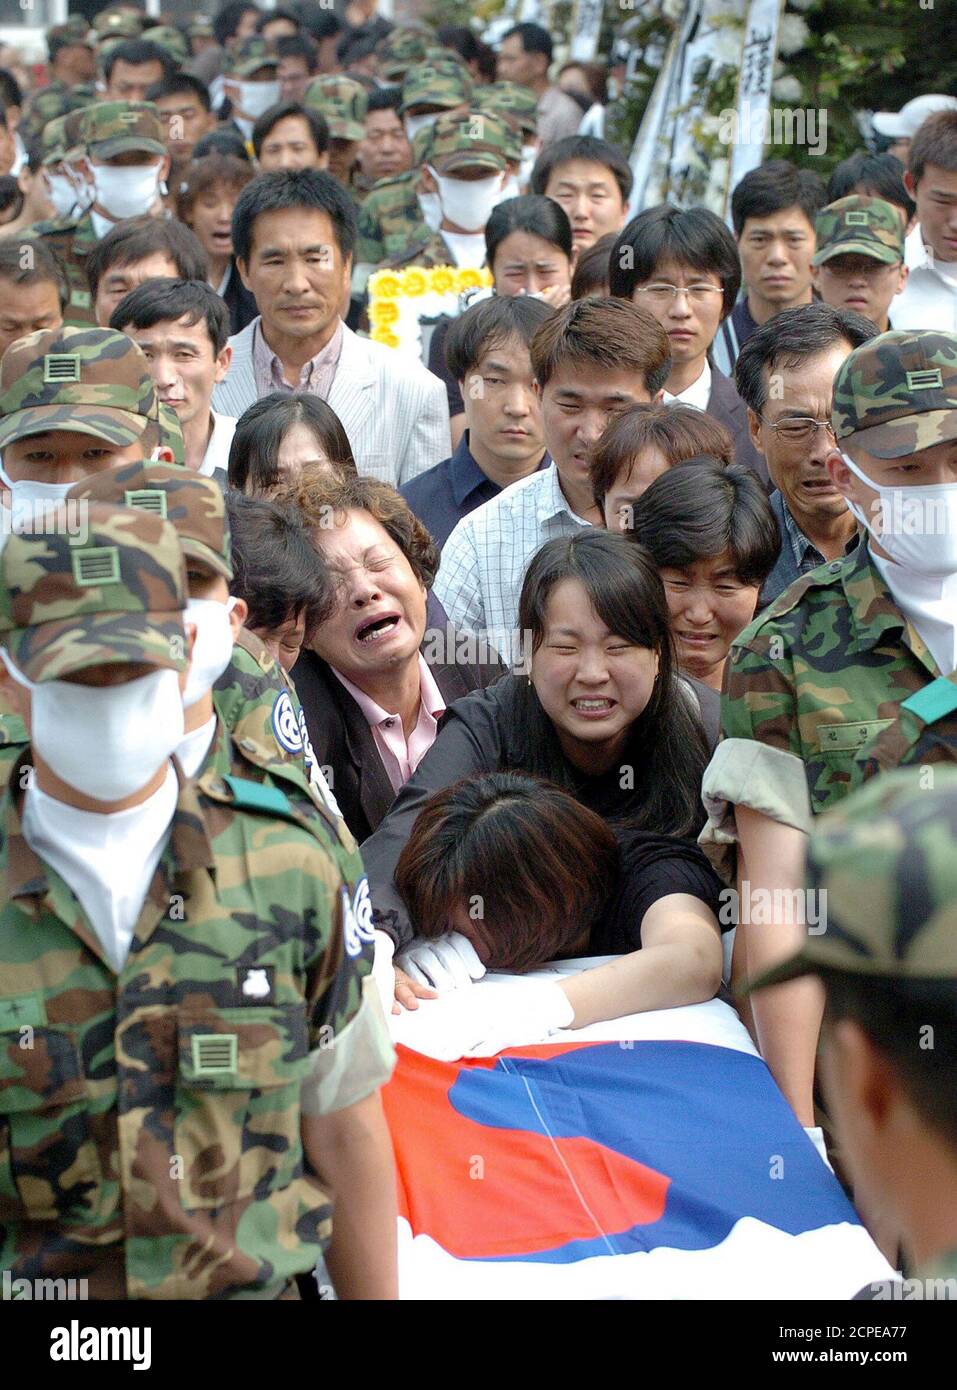 Relatives of soldiers killed during June 19 shooting incident cry during funeral at military hospital in Songnam.  Relatives of soldiers killed during the June 19 shooting incident cry during a funeral at a military hospital in Songnam, about 25 km (16 miles) southeast of Seoul, June 25, 2005. A bullied private, officially identified only as 'Kim', tossed a grenade on June 19, 2005 among barrack comrades and then opened fire, killing 8 soldiers, at a guard post in Yonchon, about 60 km (40 miles) north of Seoul, the Defence Ministry said. REUTERS/Stringer/Pool Stock Photo